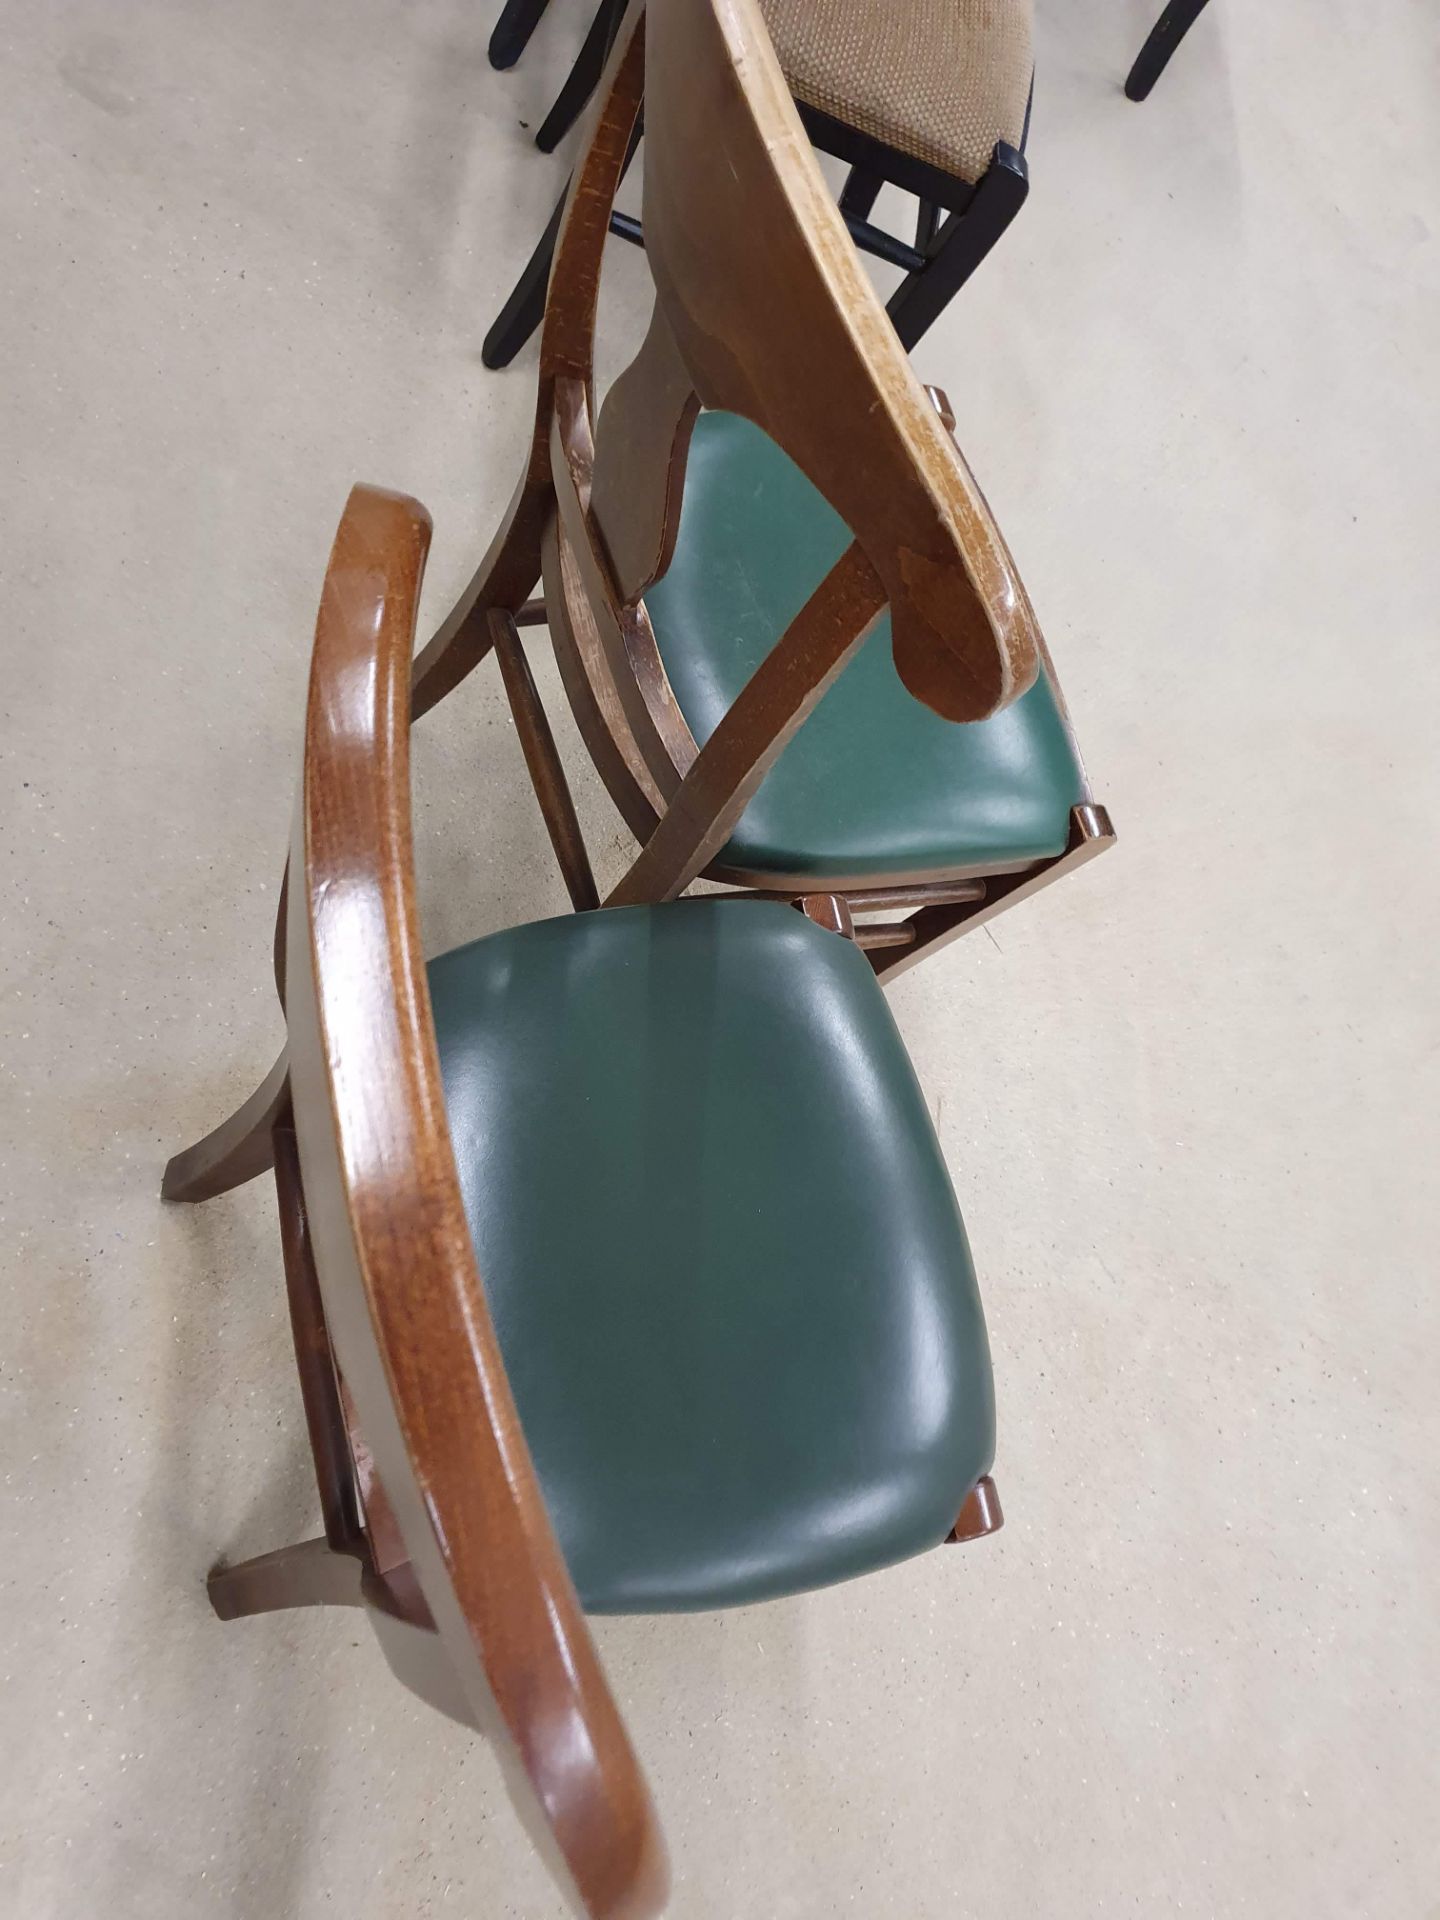 4 x Waring Dining Chairs With Green Leather Seat Pads - Ref PA210 - CL463 - Location: Altrincham WA1 - Image 2 of 4